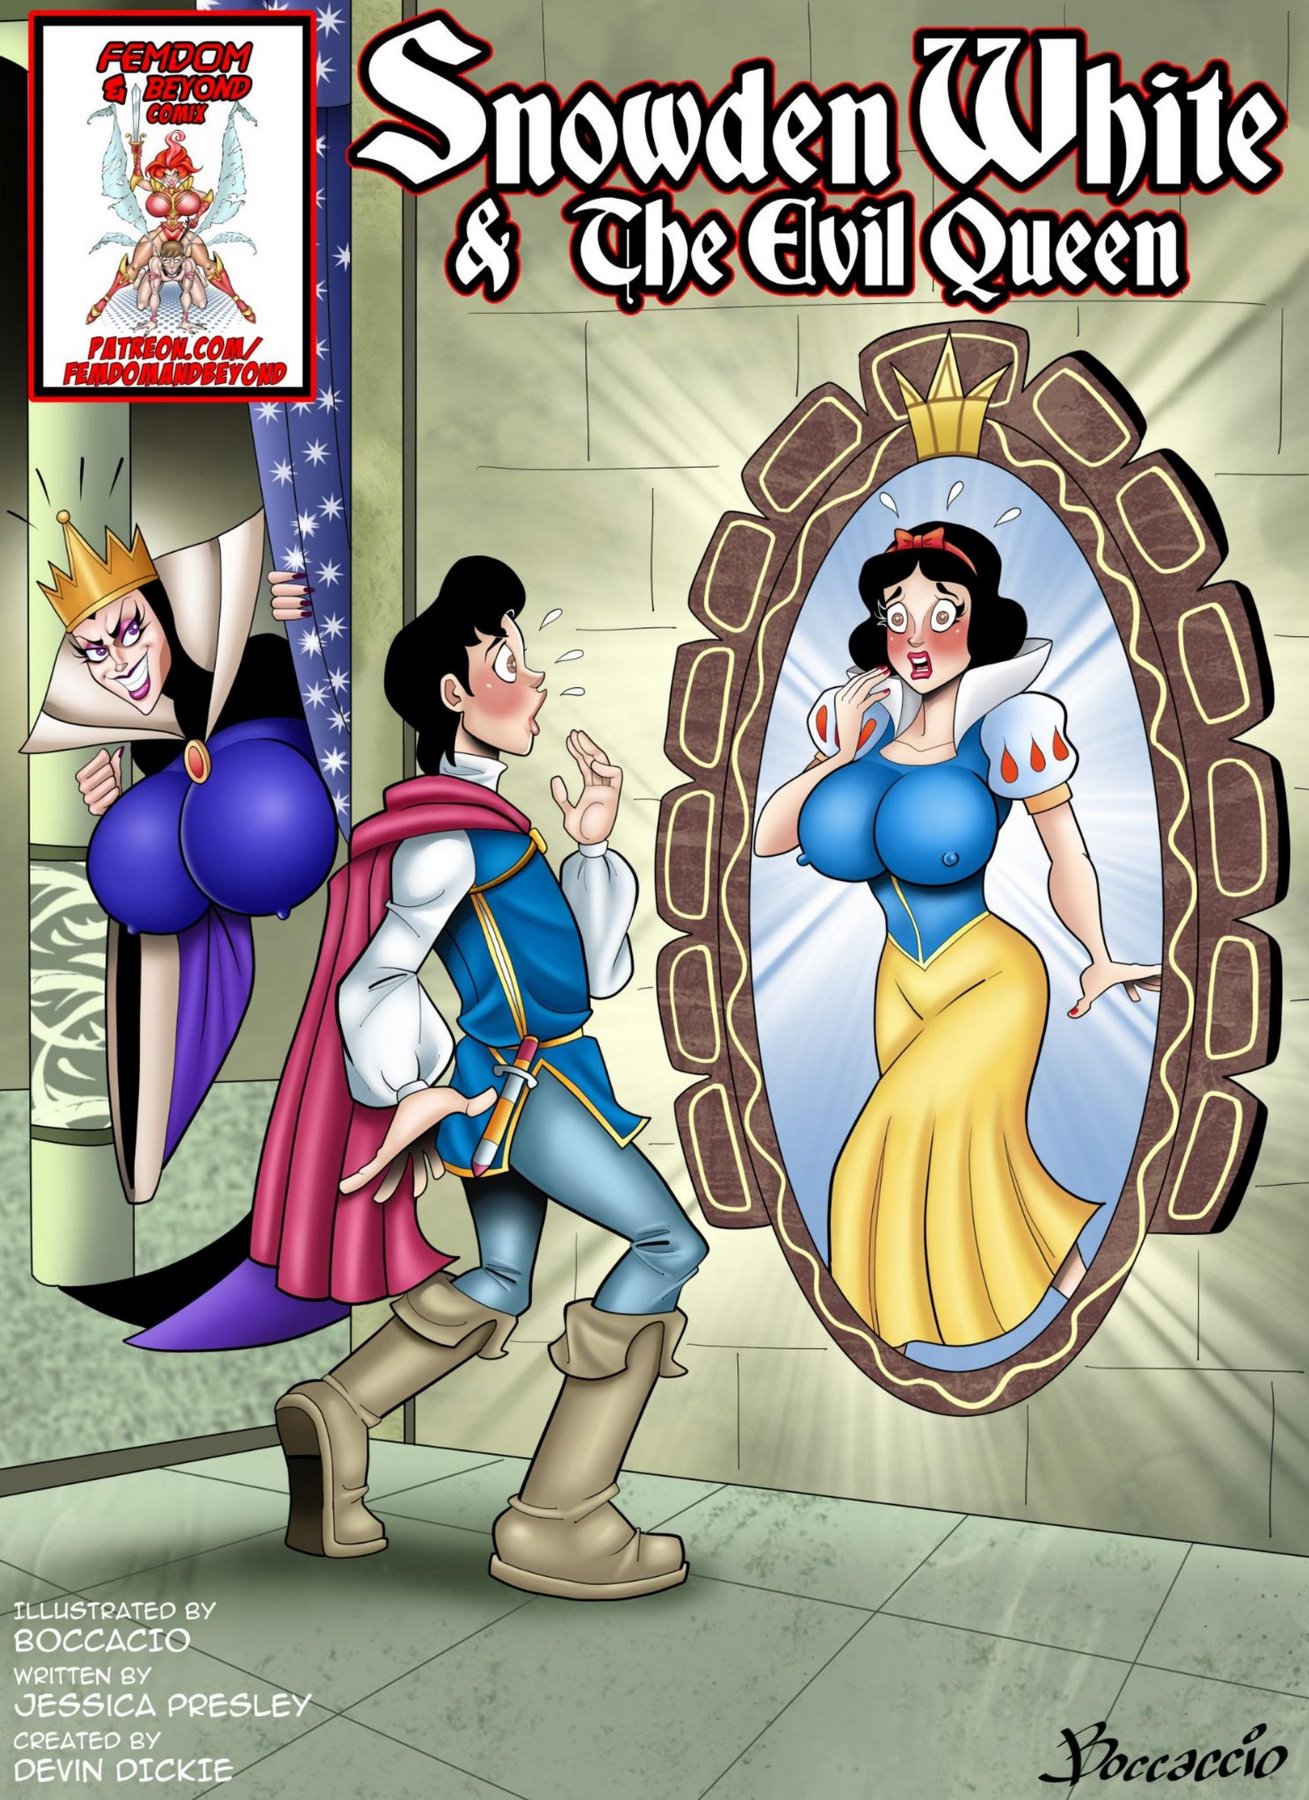 Evil Transformation Sex - Snowden White and The Evil Queen- Devin Dickie - Porn Cartoon Comics